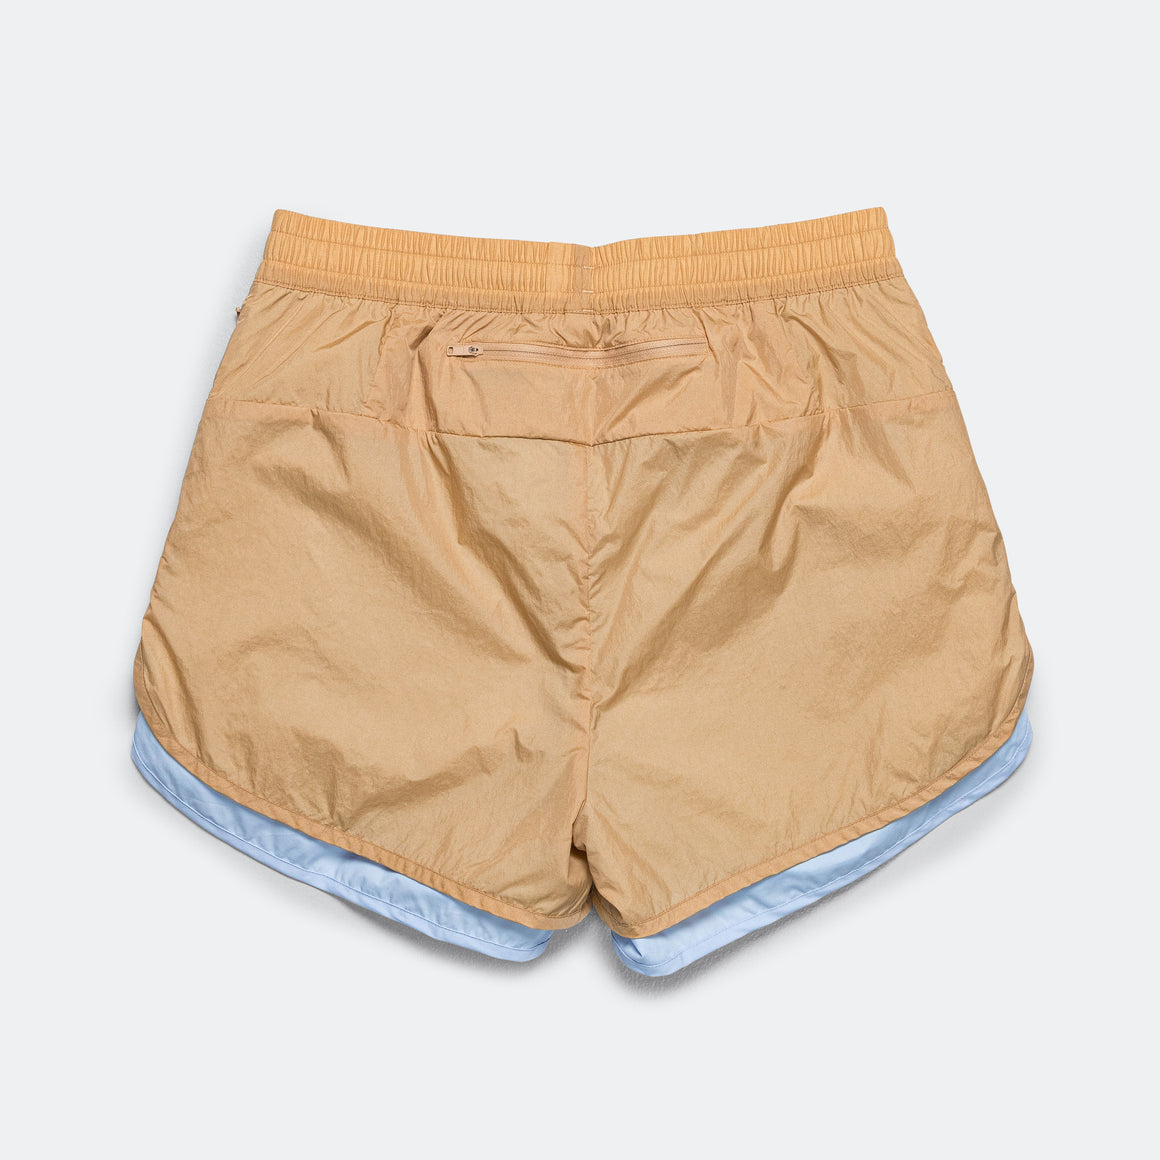 adidas - Layer Short x Wales Bonner - Beige WB - UP THERE